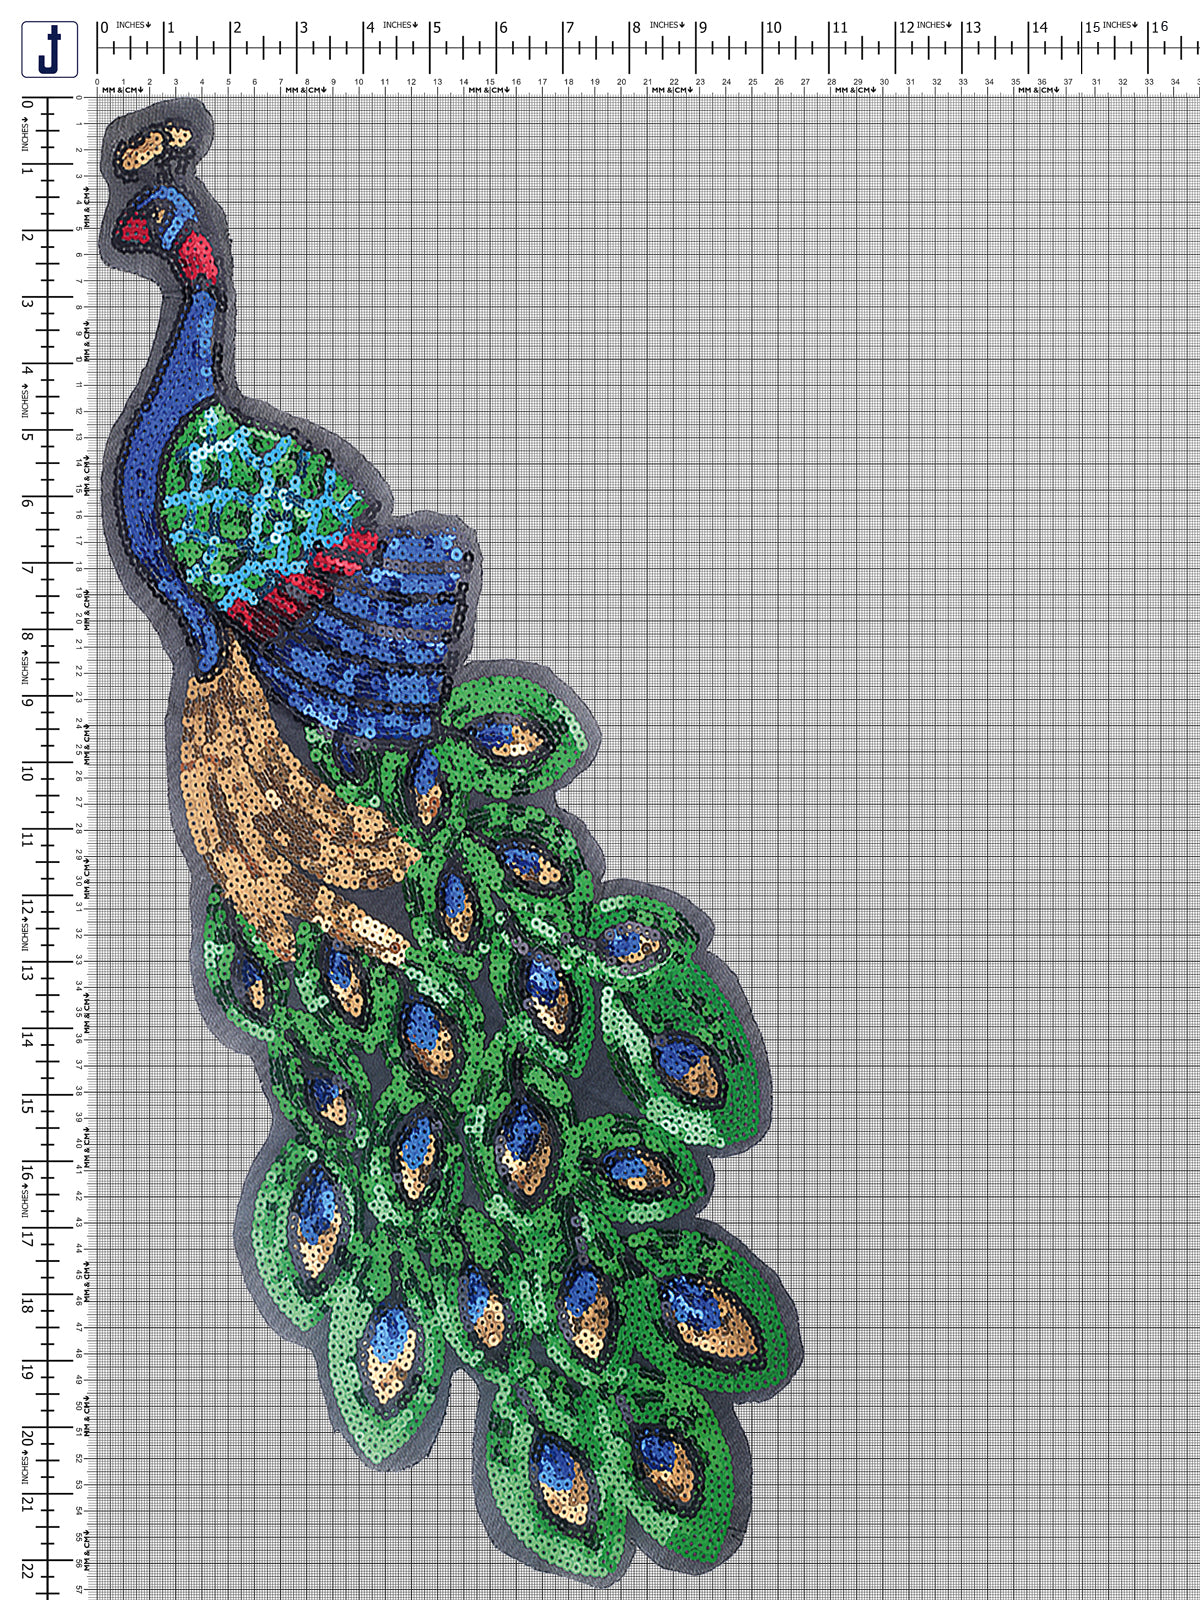 Wide Big Gorgeous Peacock bird Sequins Patch